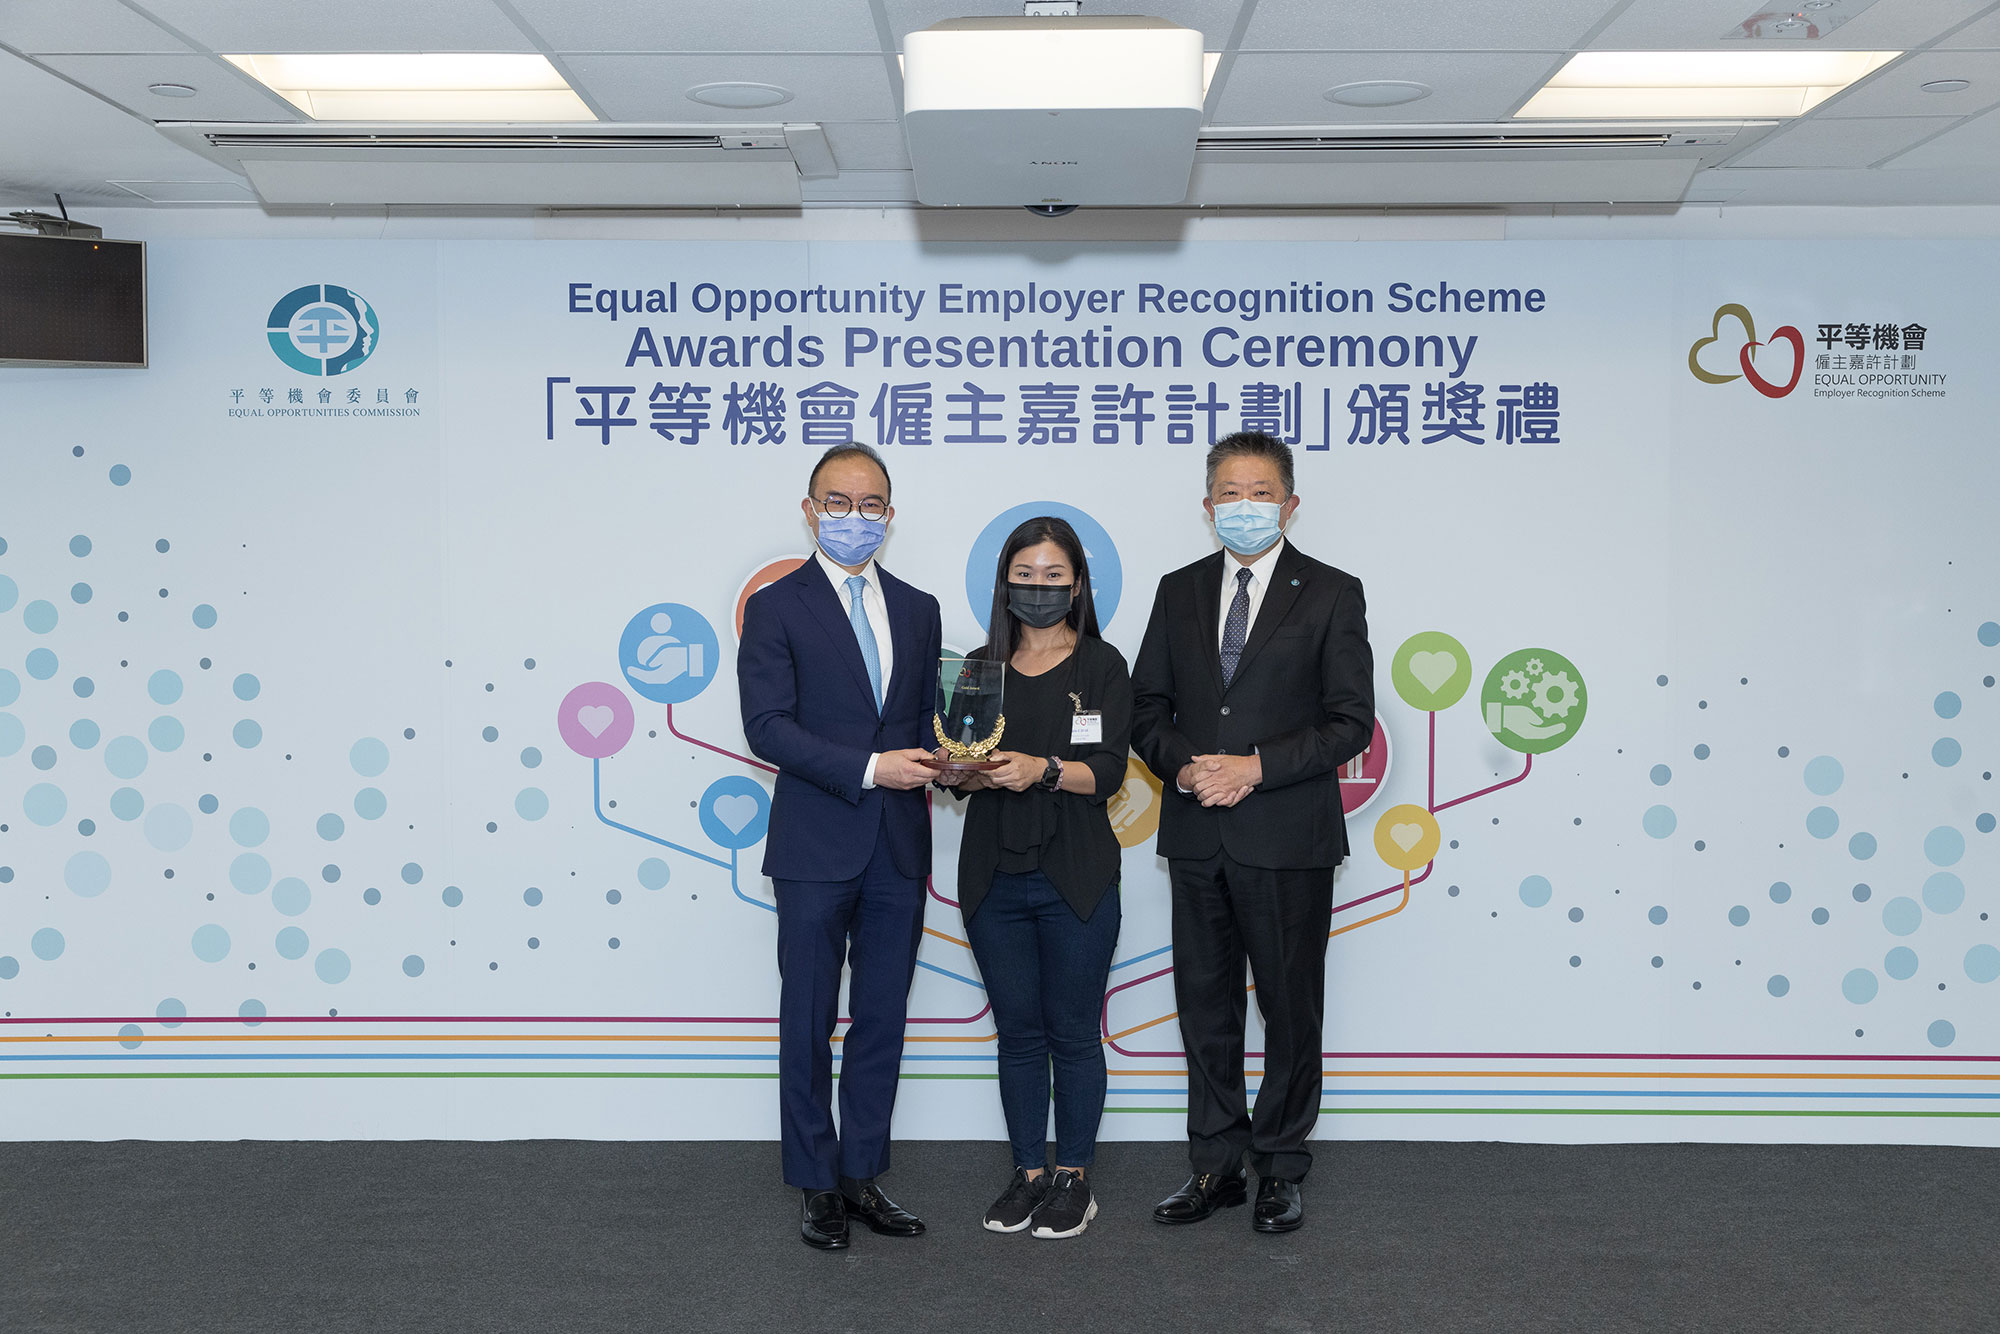 Mr Erick TSANG Kwok-wai, IDSM, JP, Secretary for Constitutional and Mainland Affairs (left) and Mr Ricky CHU Man-kin, IDS, Chairperson of the Equal Opportunities Commission (right), present the trophy to the representative of Eaton HK (centre), winner of the Gold Award of the Equal Opportunity Employer Recognition Scheme.